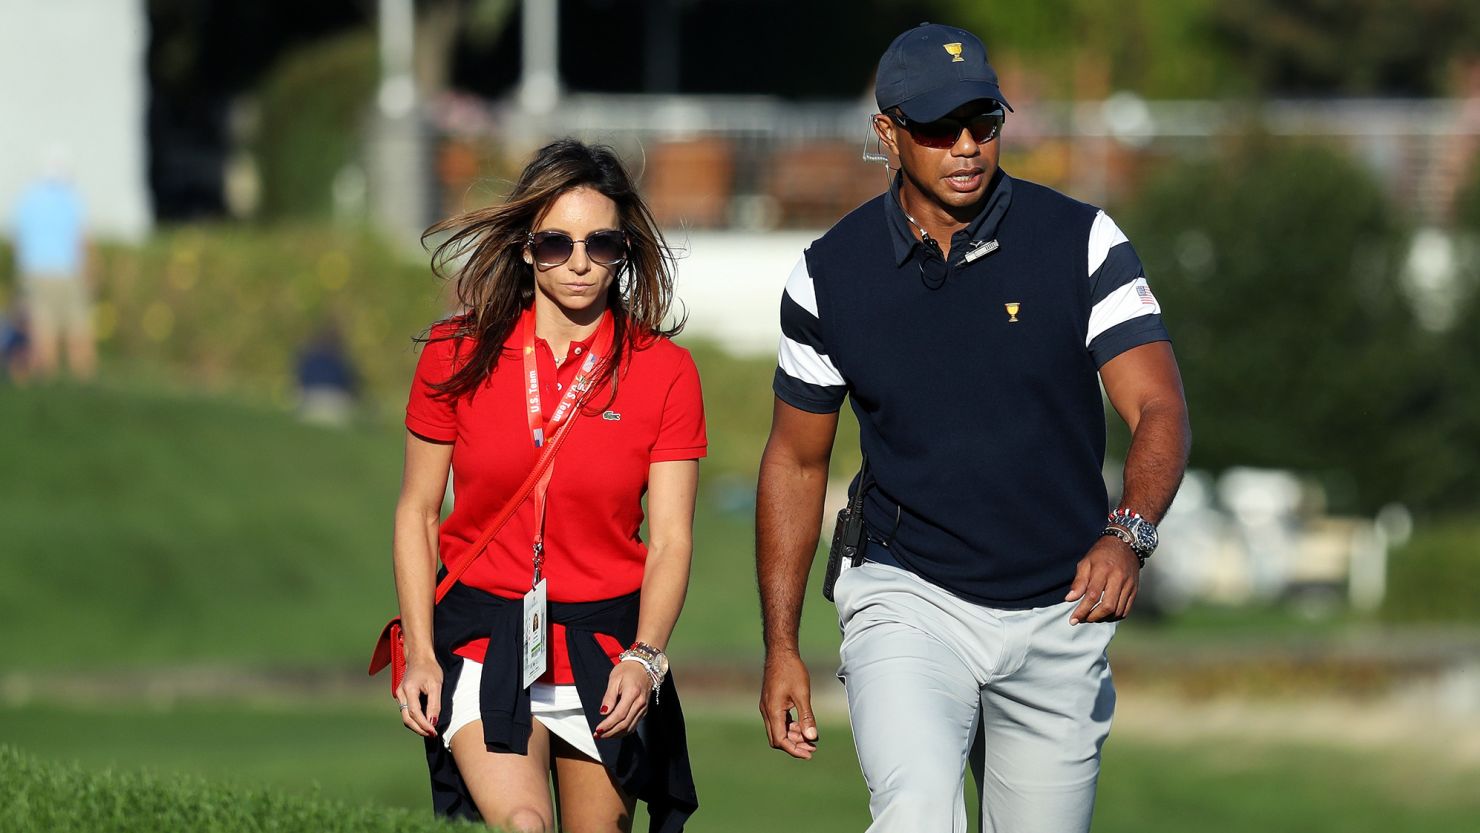 JERSEY CITY, NJ - SEPTEMBER 28:  Captain's assistant Tiger Woods of the U.S. Team walks with Erica Herman during Thursday foursome matches of the Presidents Cup at Liberty National Golf Club on September 28, 2017 in Jersey City, New Jersey.  (Photo by Rob Carr/Getty Images)